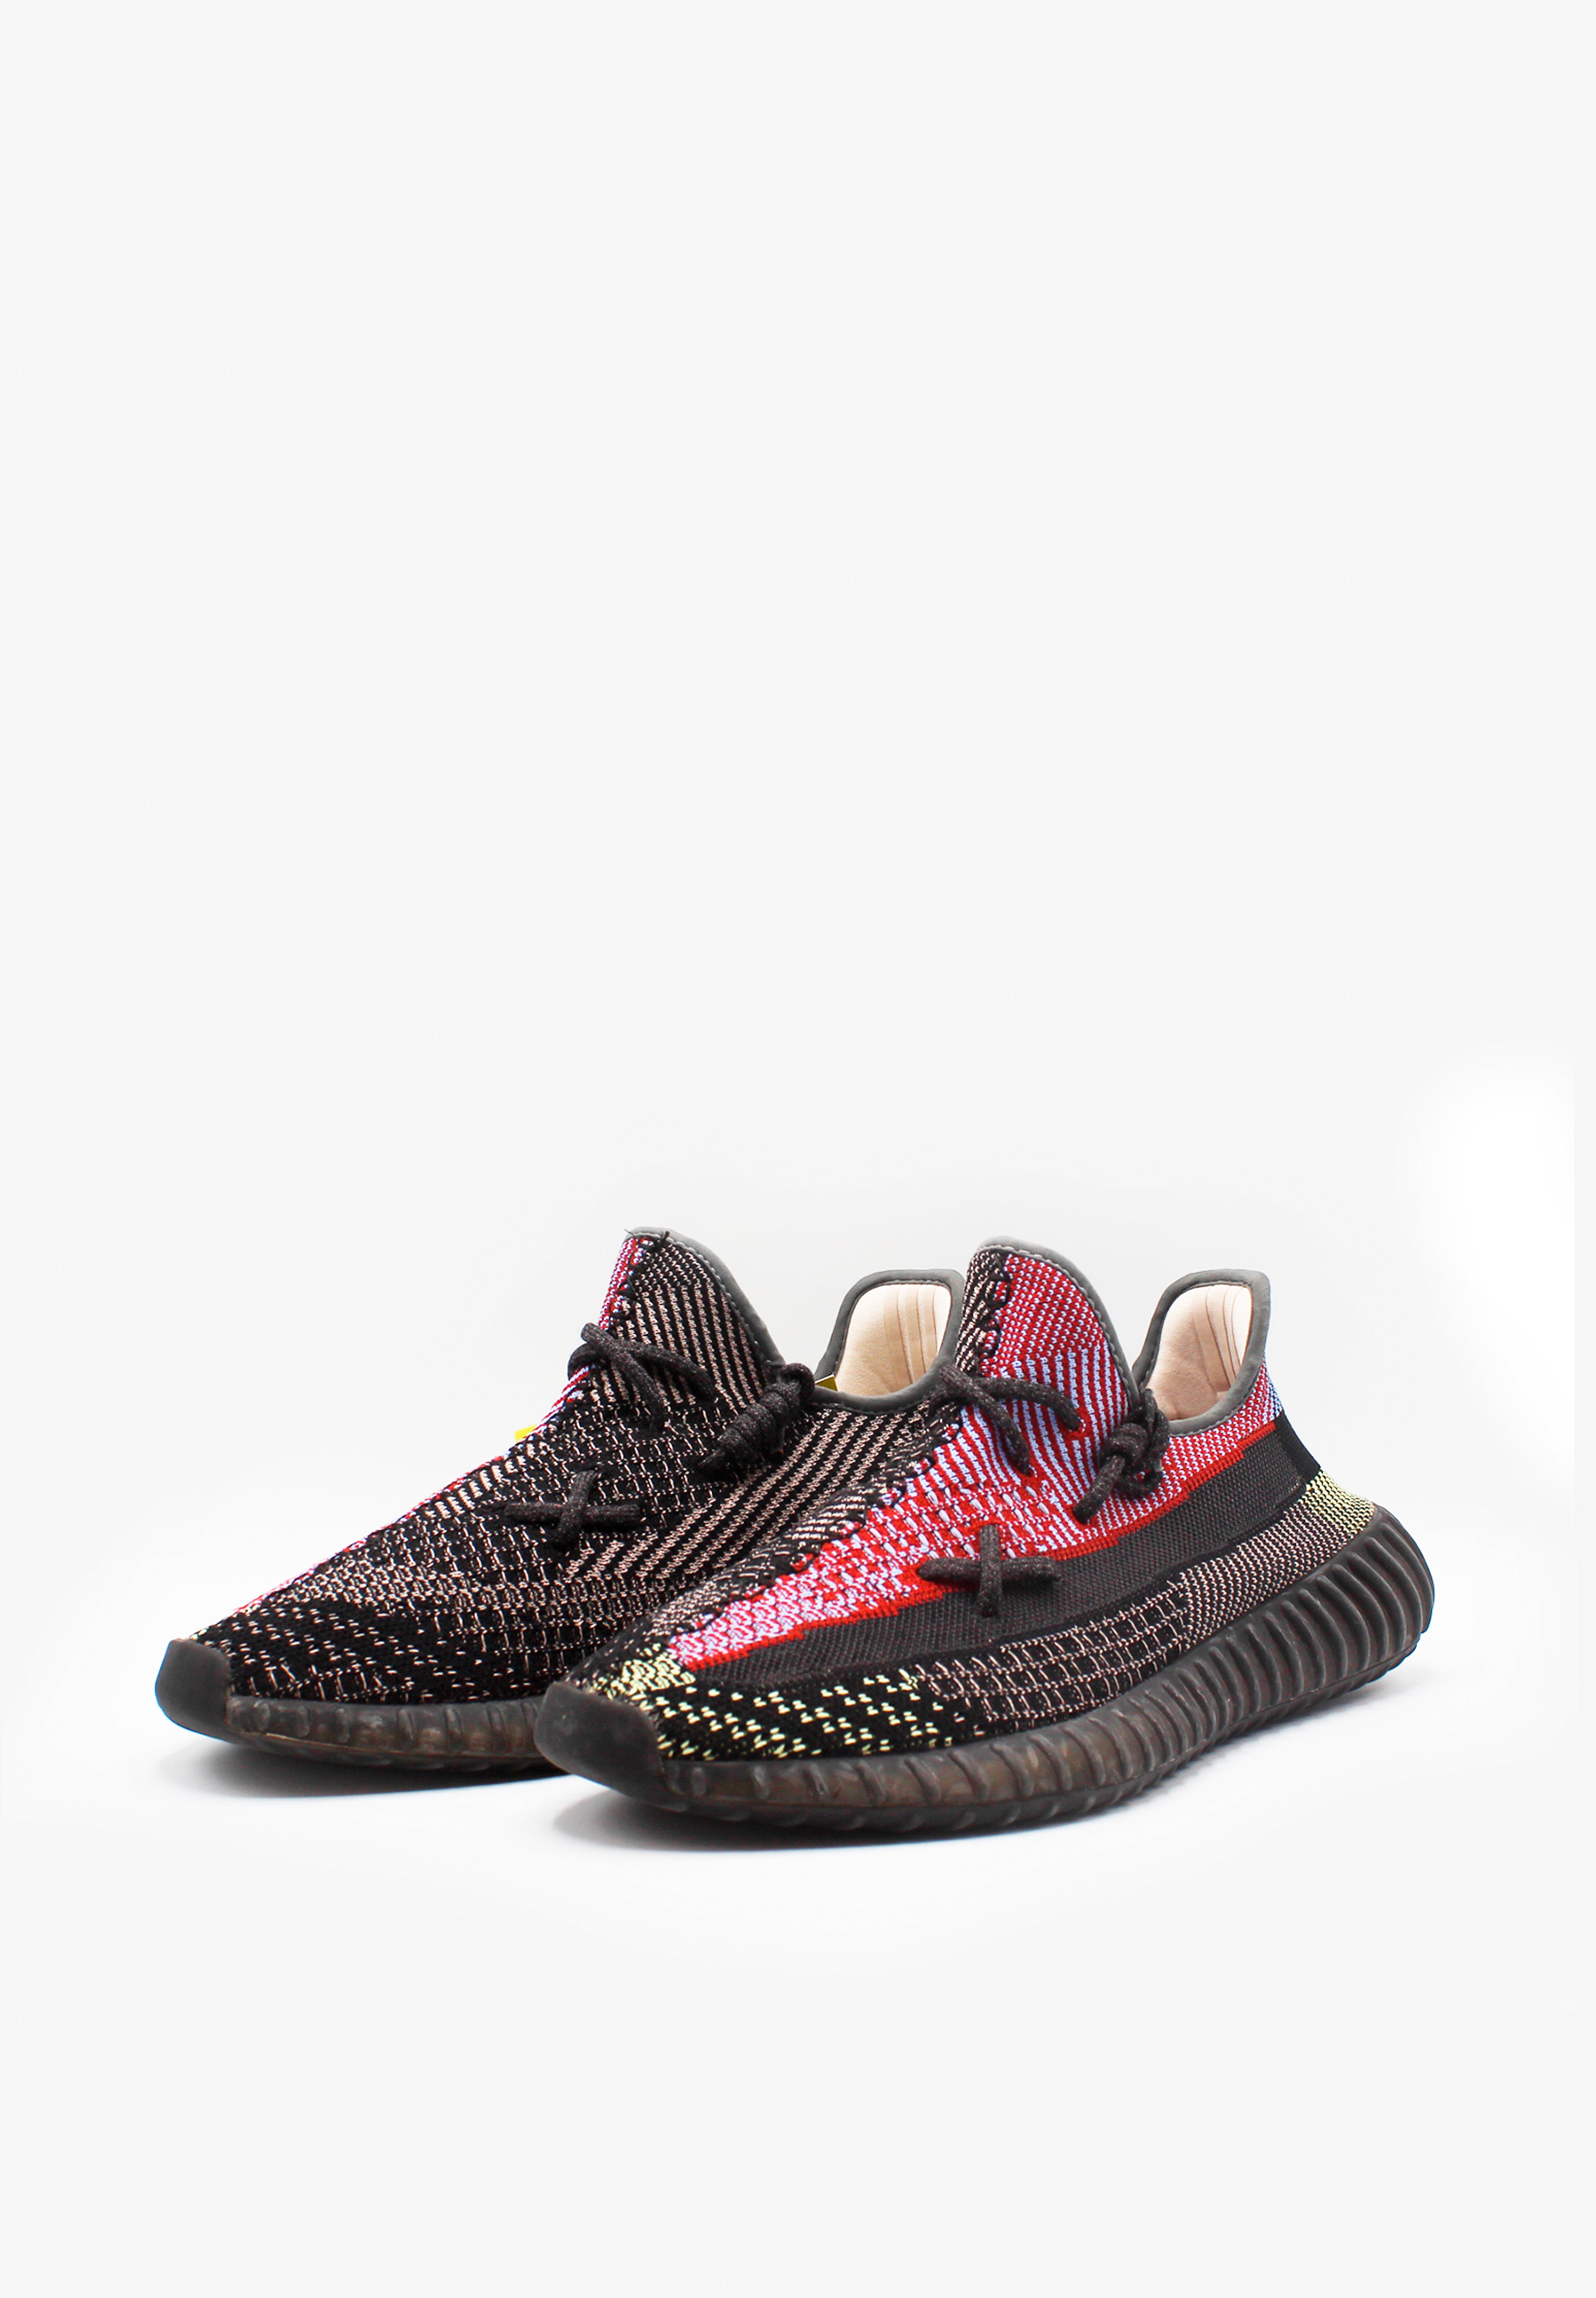 ARCHIVE SNEAKRS | SNEAKERS YEEZY 350 V2 YECHEIL REFLECTIVE TALLA 45.5